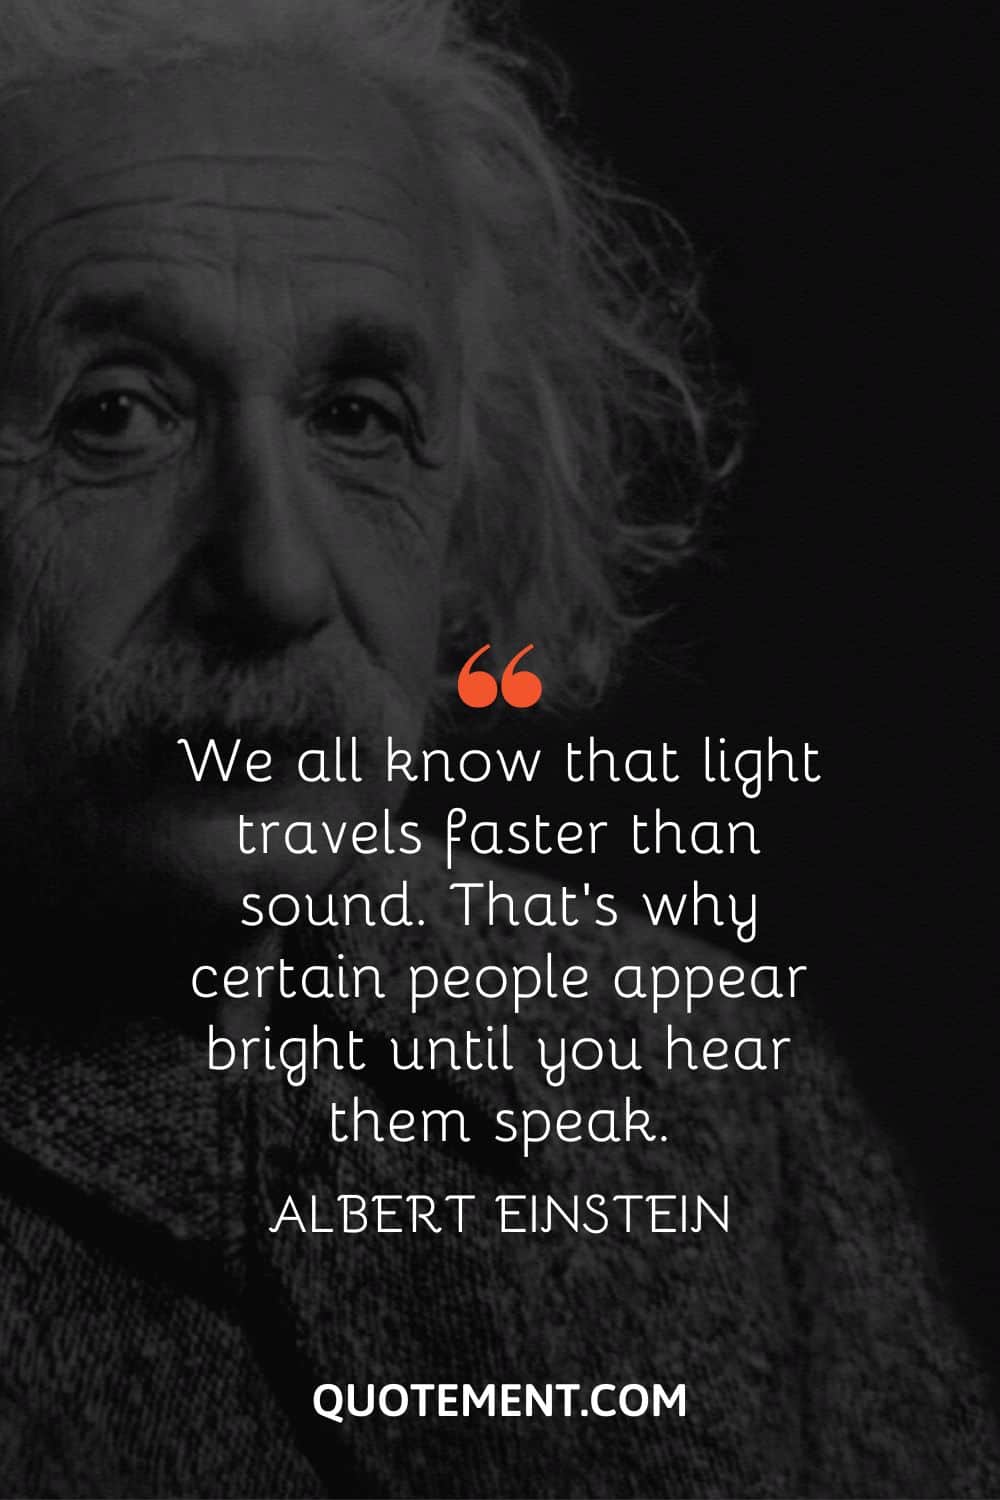 We all know that light travels faster than sound